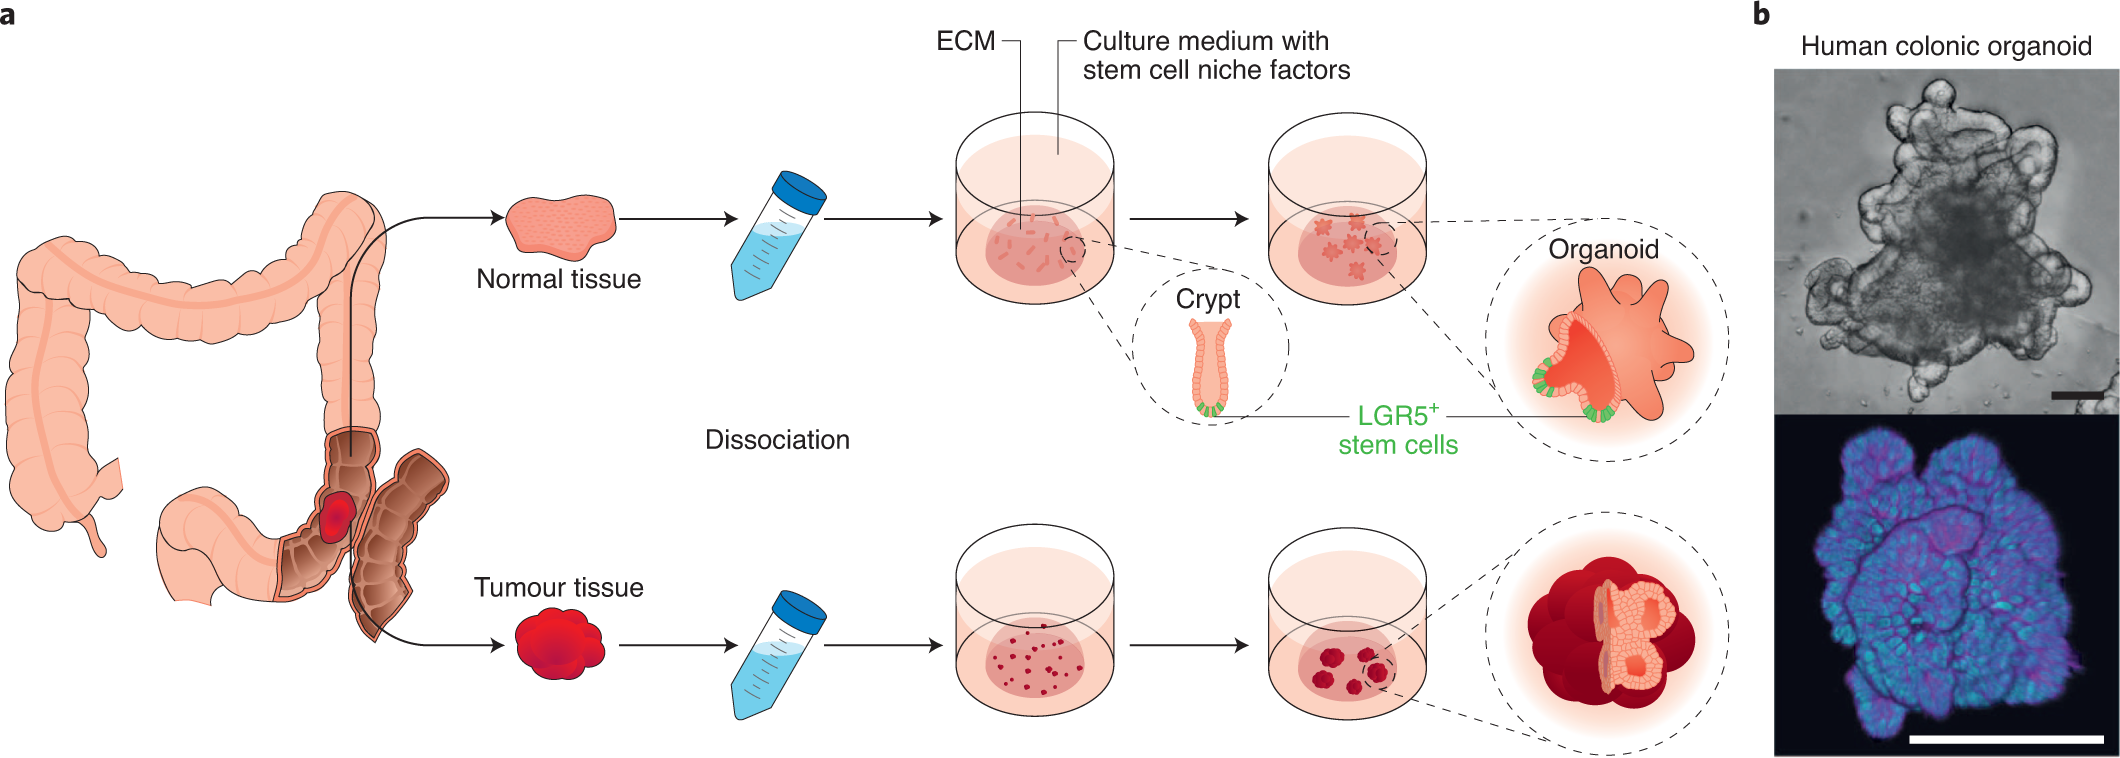 Somatic cell-derived organoids as prototypes of human epithelial tissues  and diseases | Nature Materials